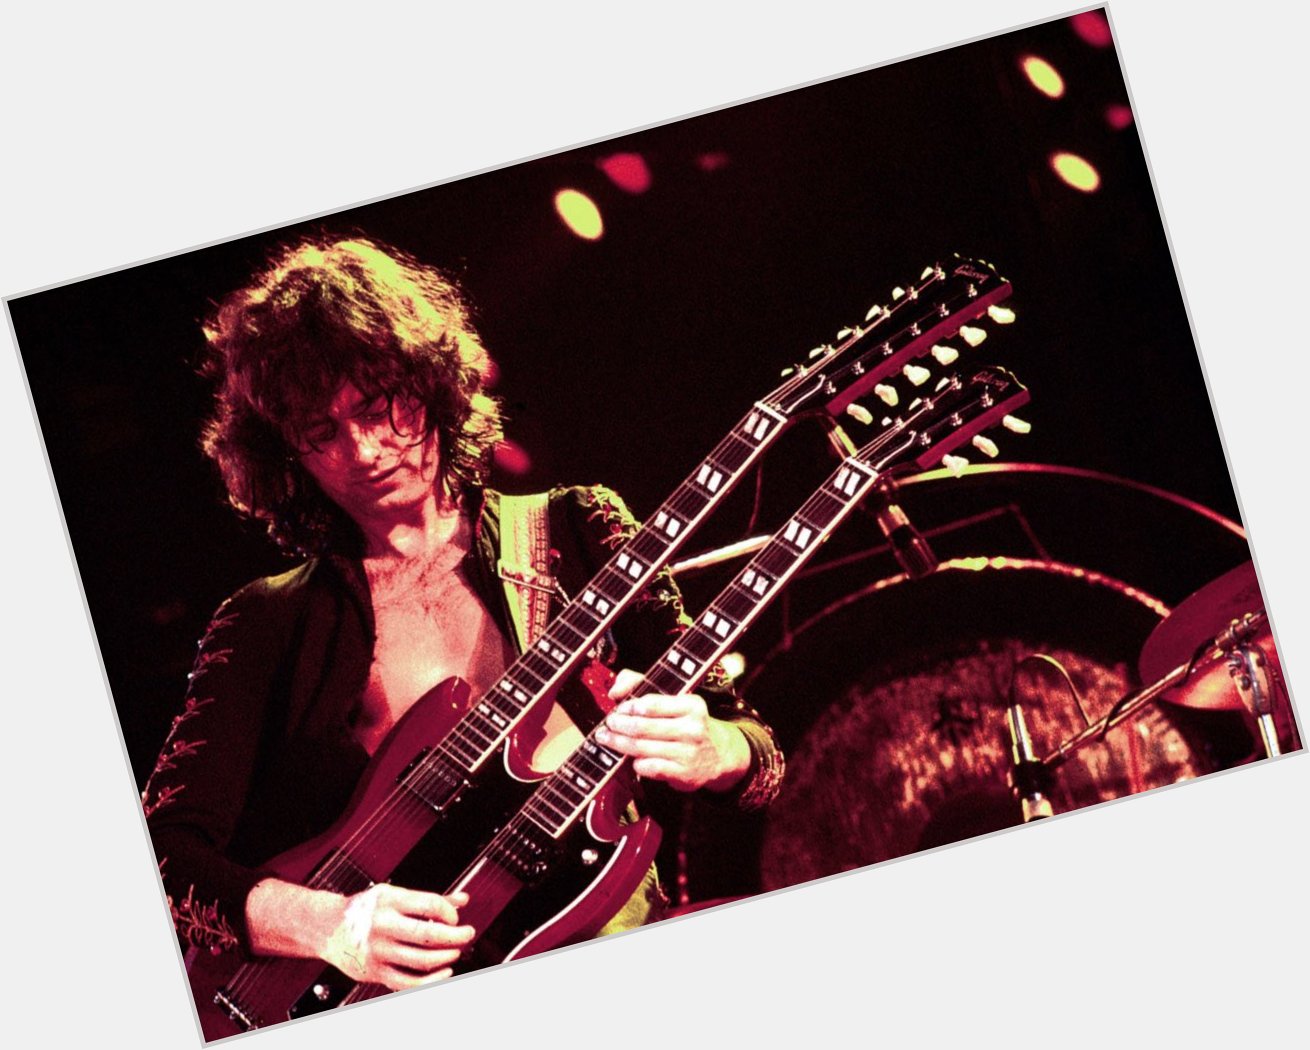 Happy Birthday to Jimmy Page from Led Zeppelin, born Jan 9th 1944 